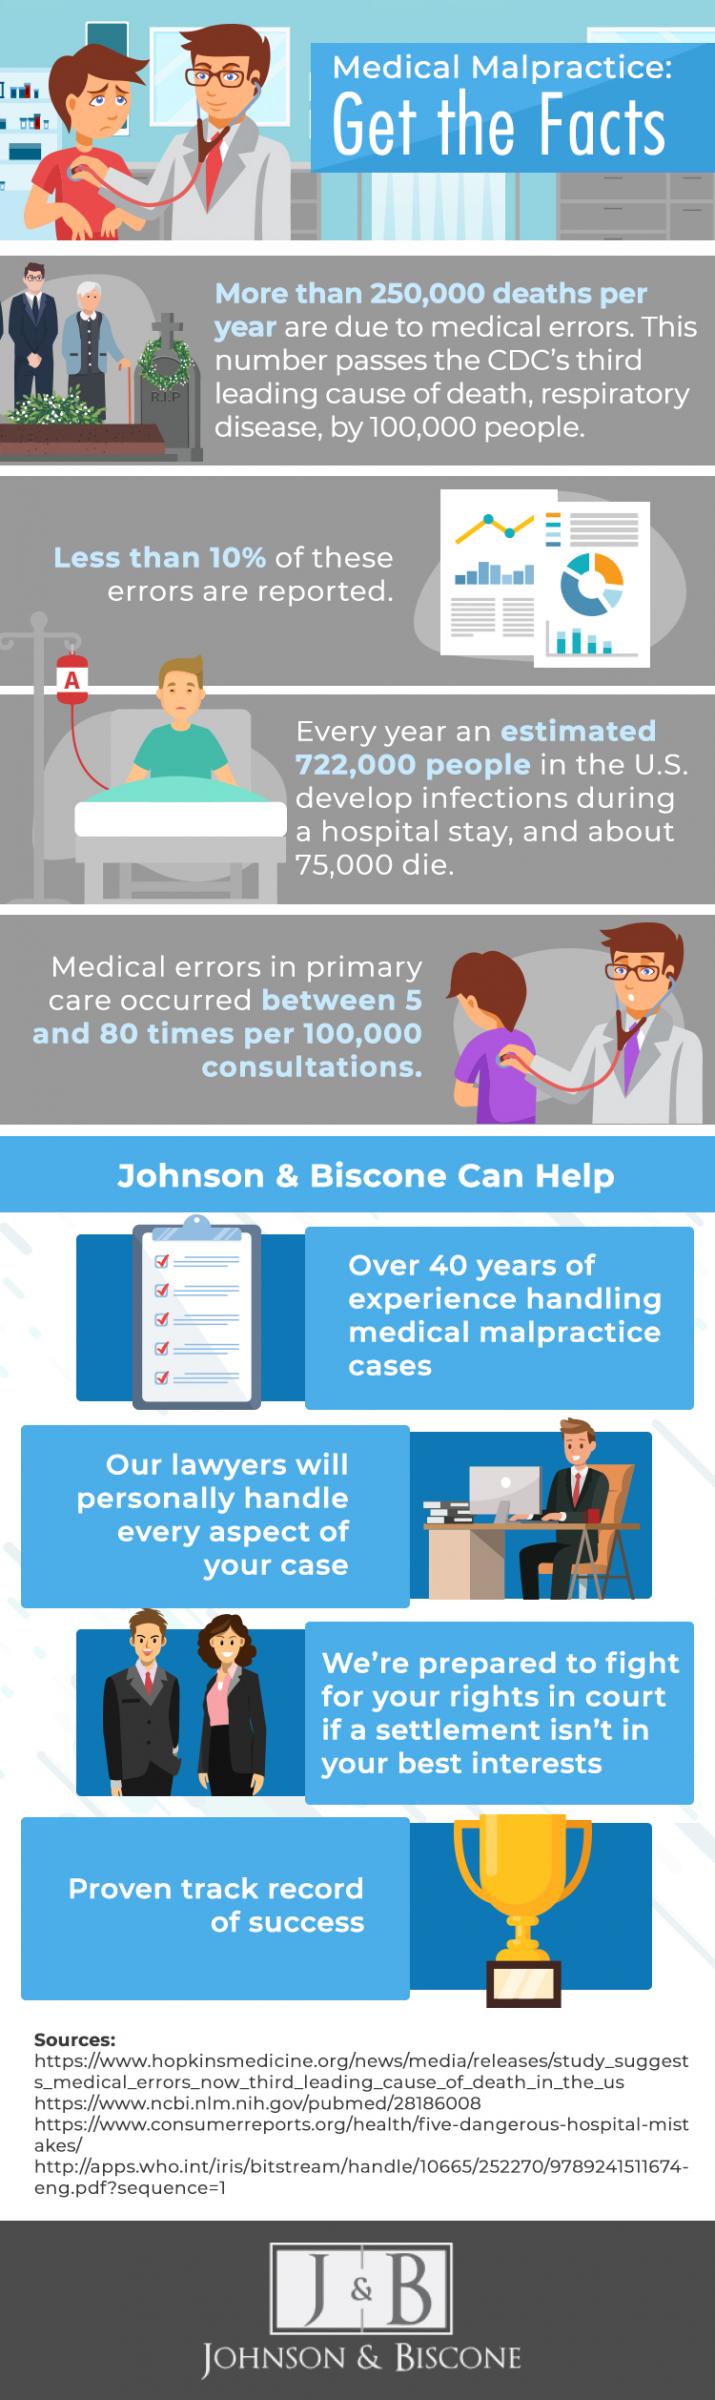 medical malpractice facts infographic